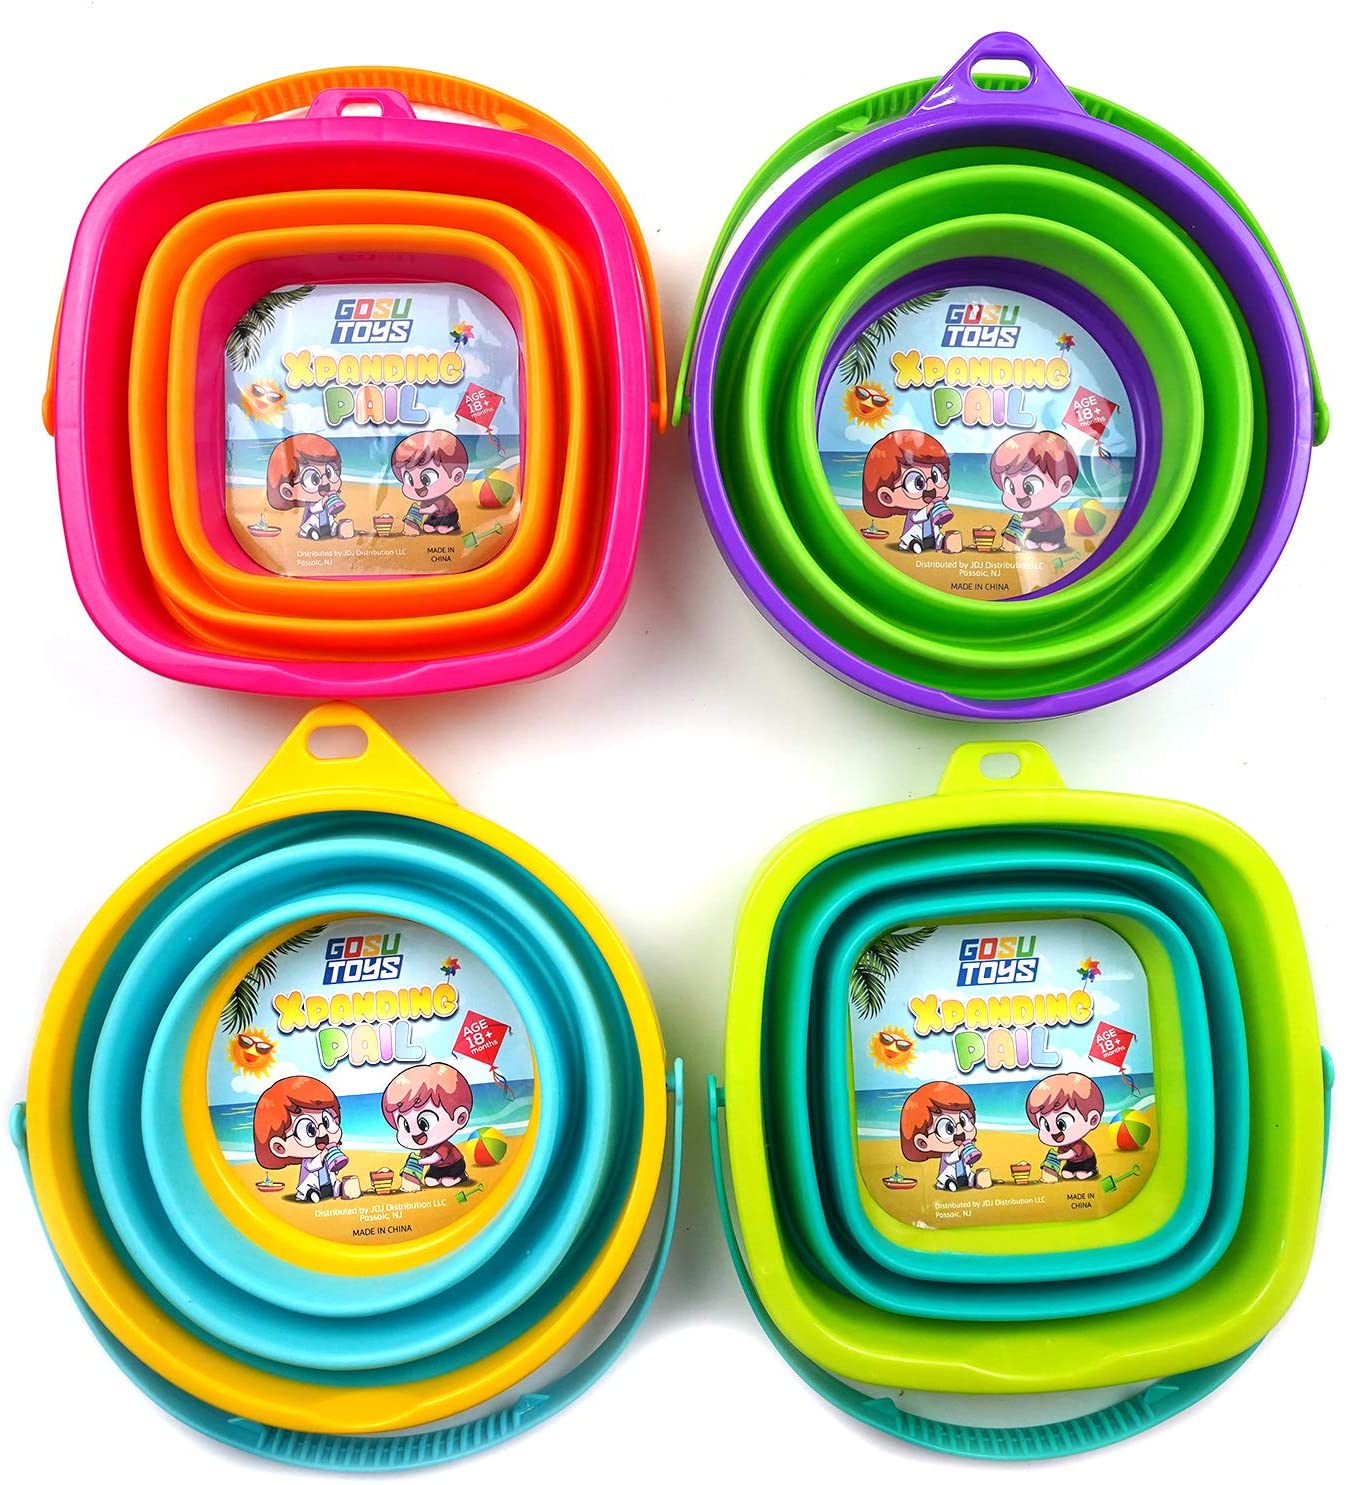 Gosu Toys Foldable Sand Bucket Expandable Sand Pail Square and Circle for Beach Multi Purpose for Kids Collapsible Silicone Bucket